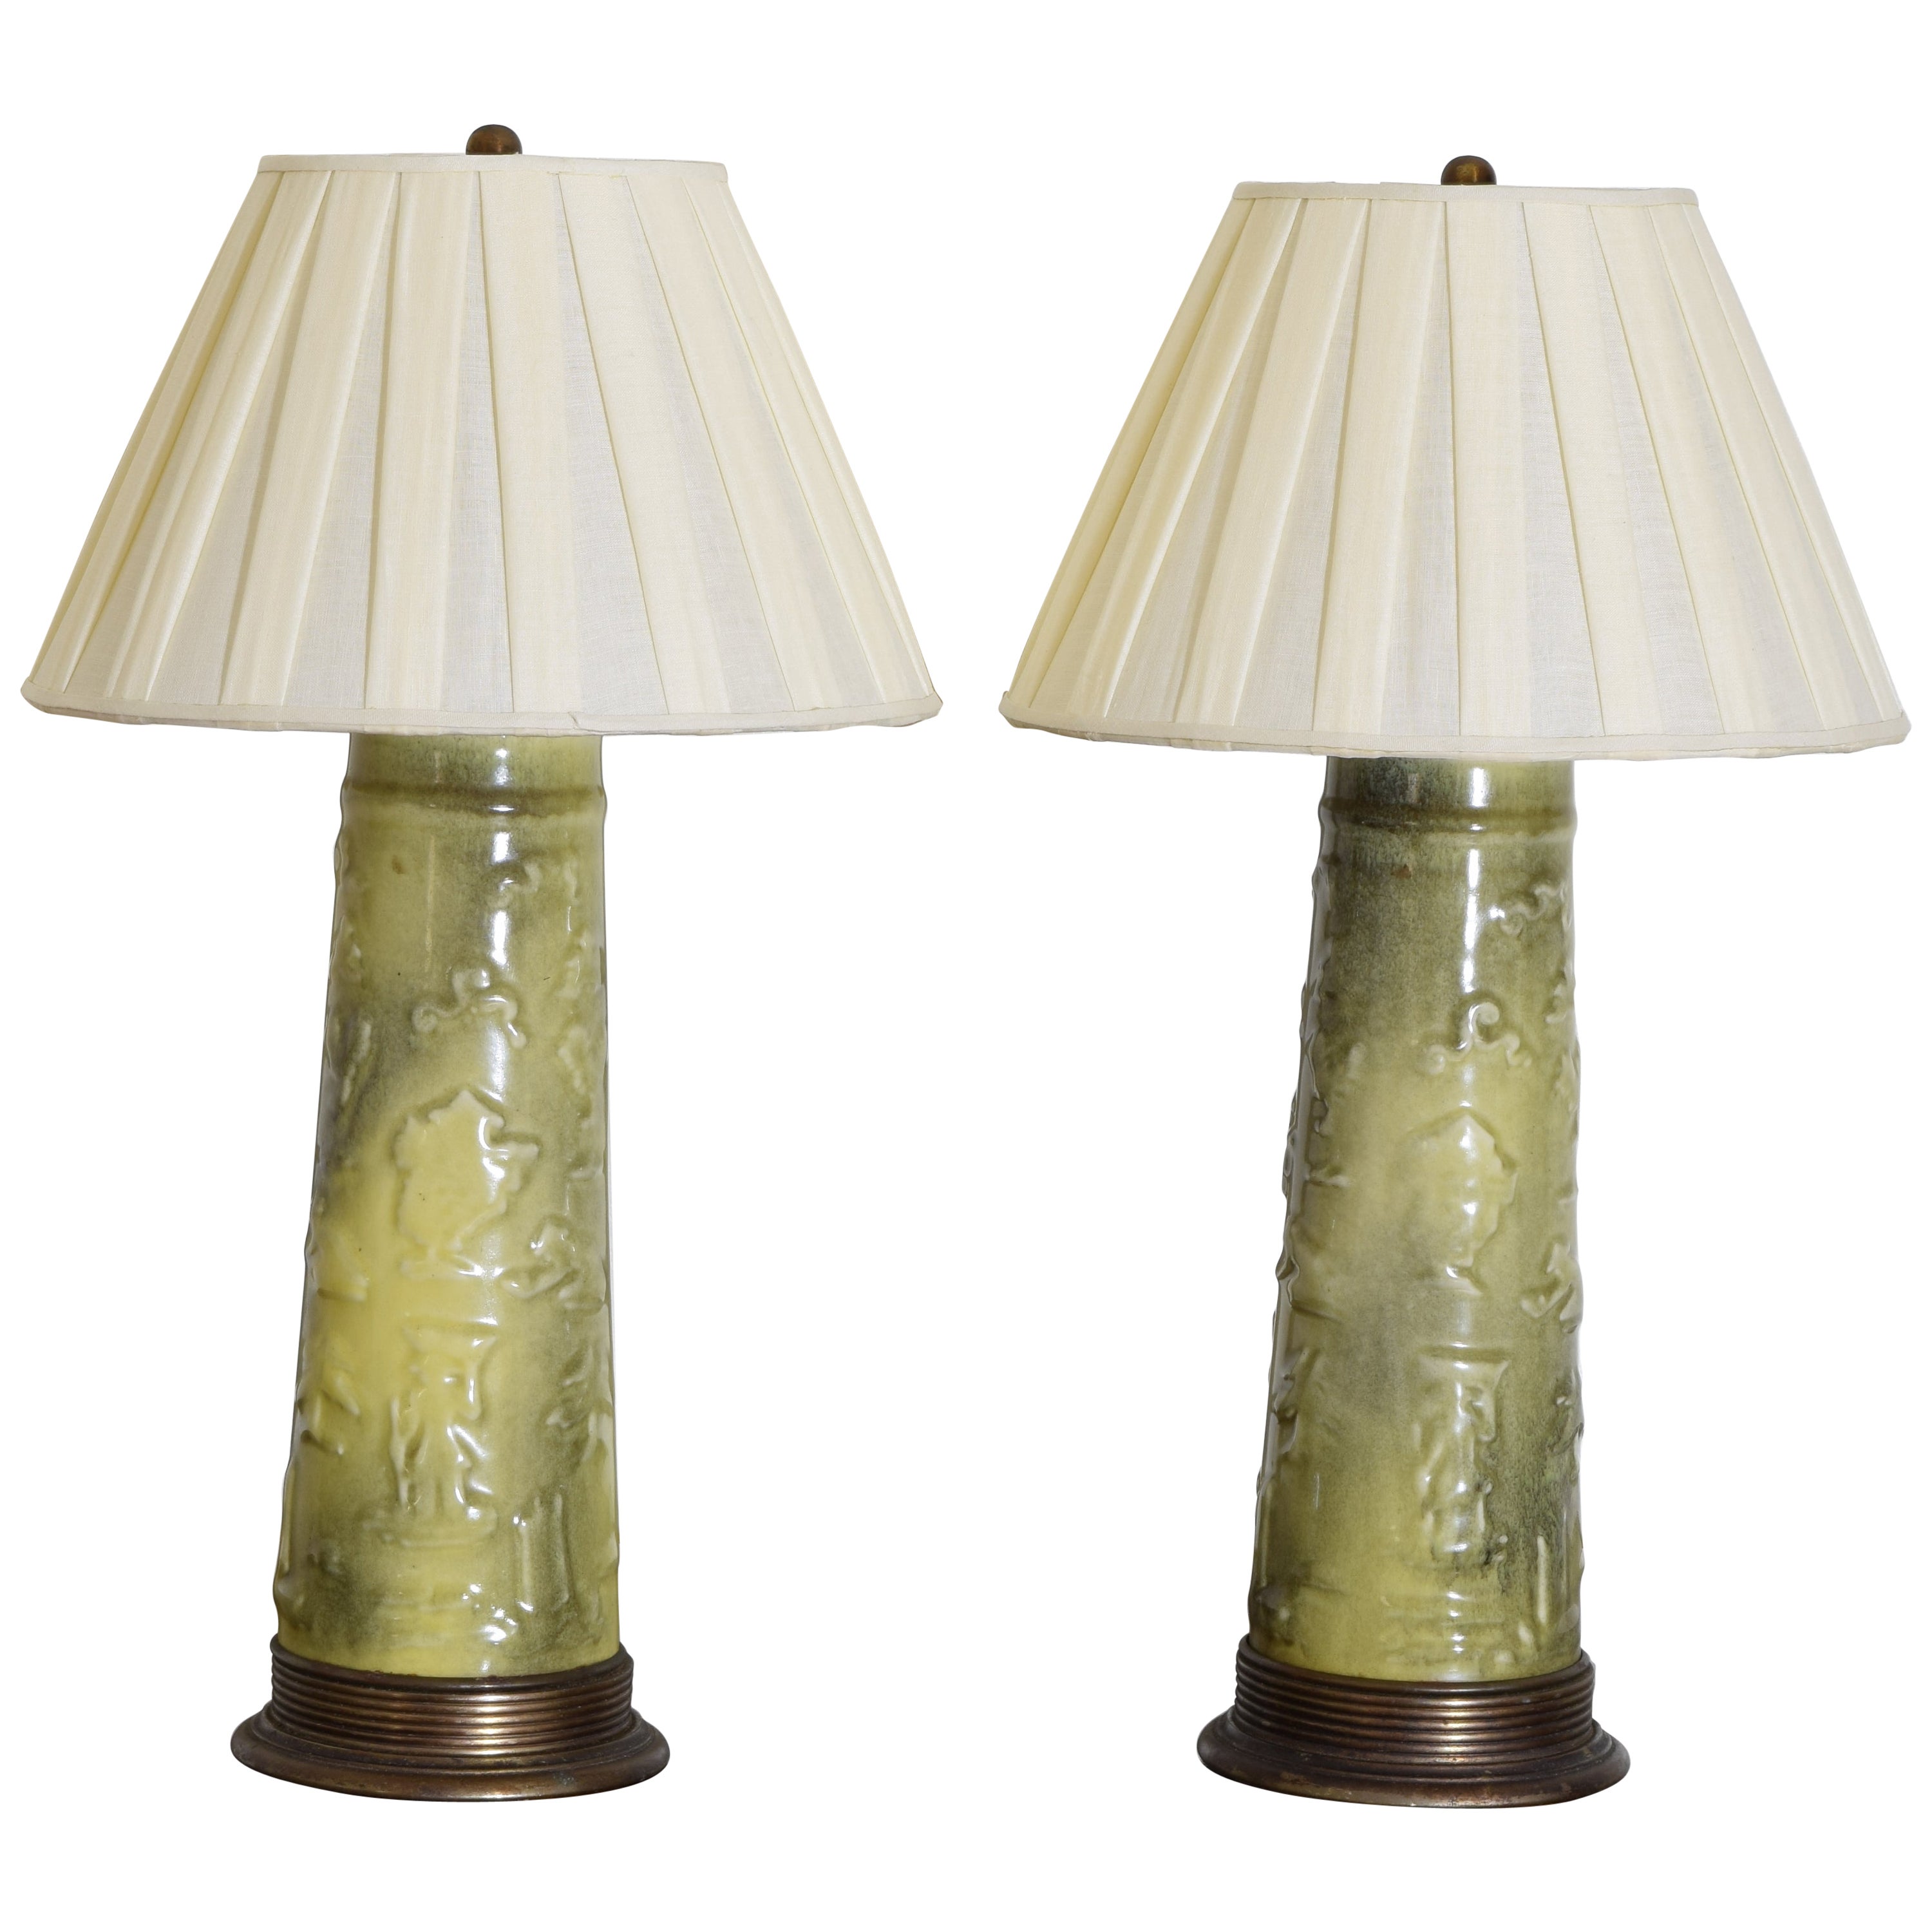 Pair of Ceramic Table Lamps in the Japanese Taste, mid 20th century